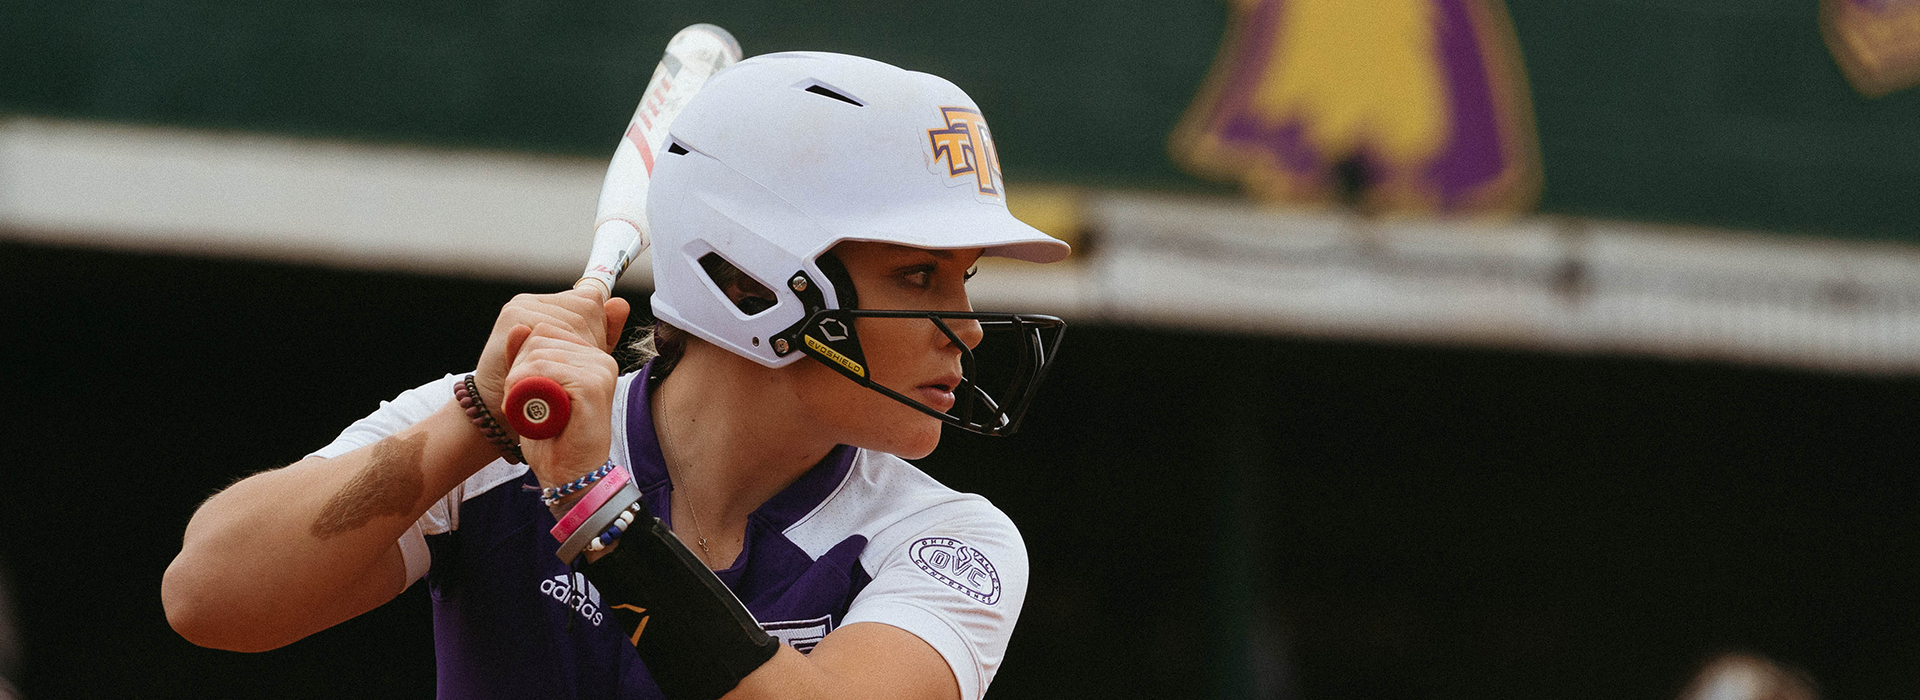 Talley HR leads Golden Eagles over Chattanooga